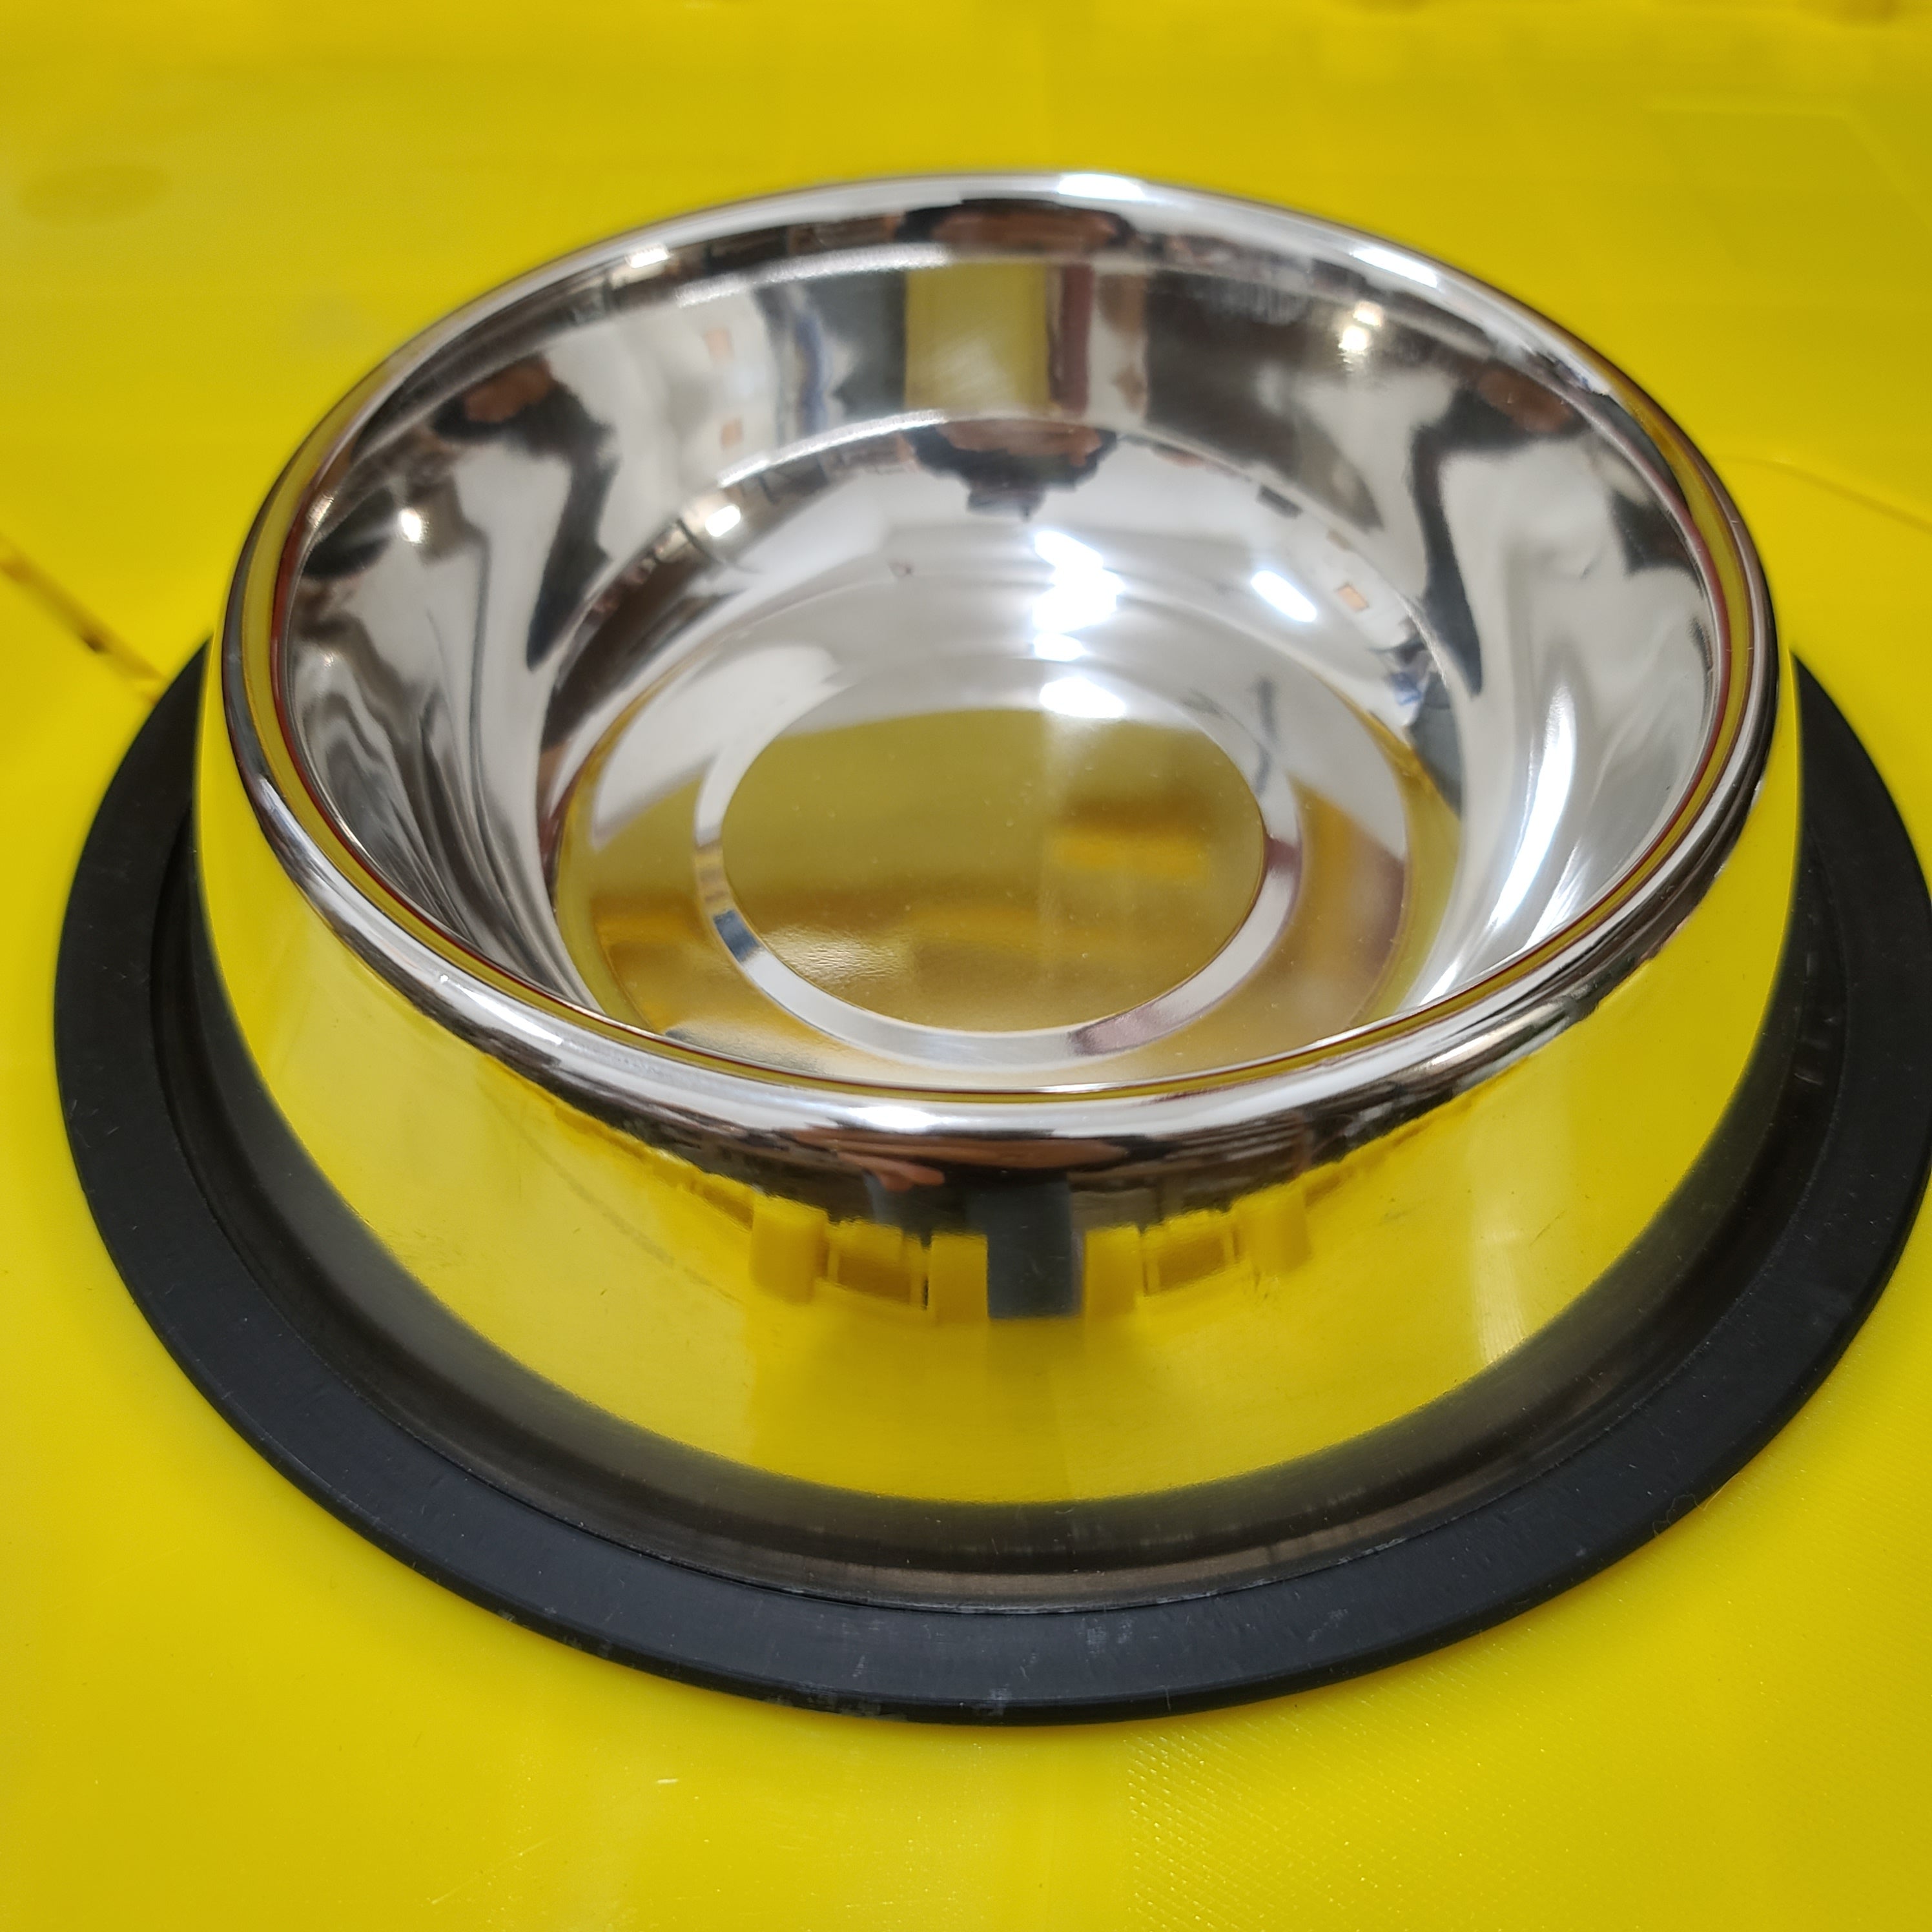 Silver Plated - No Tip (Food or Water) - CuBowl